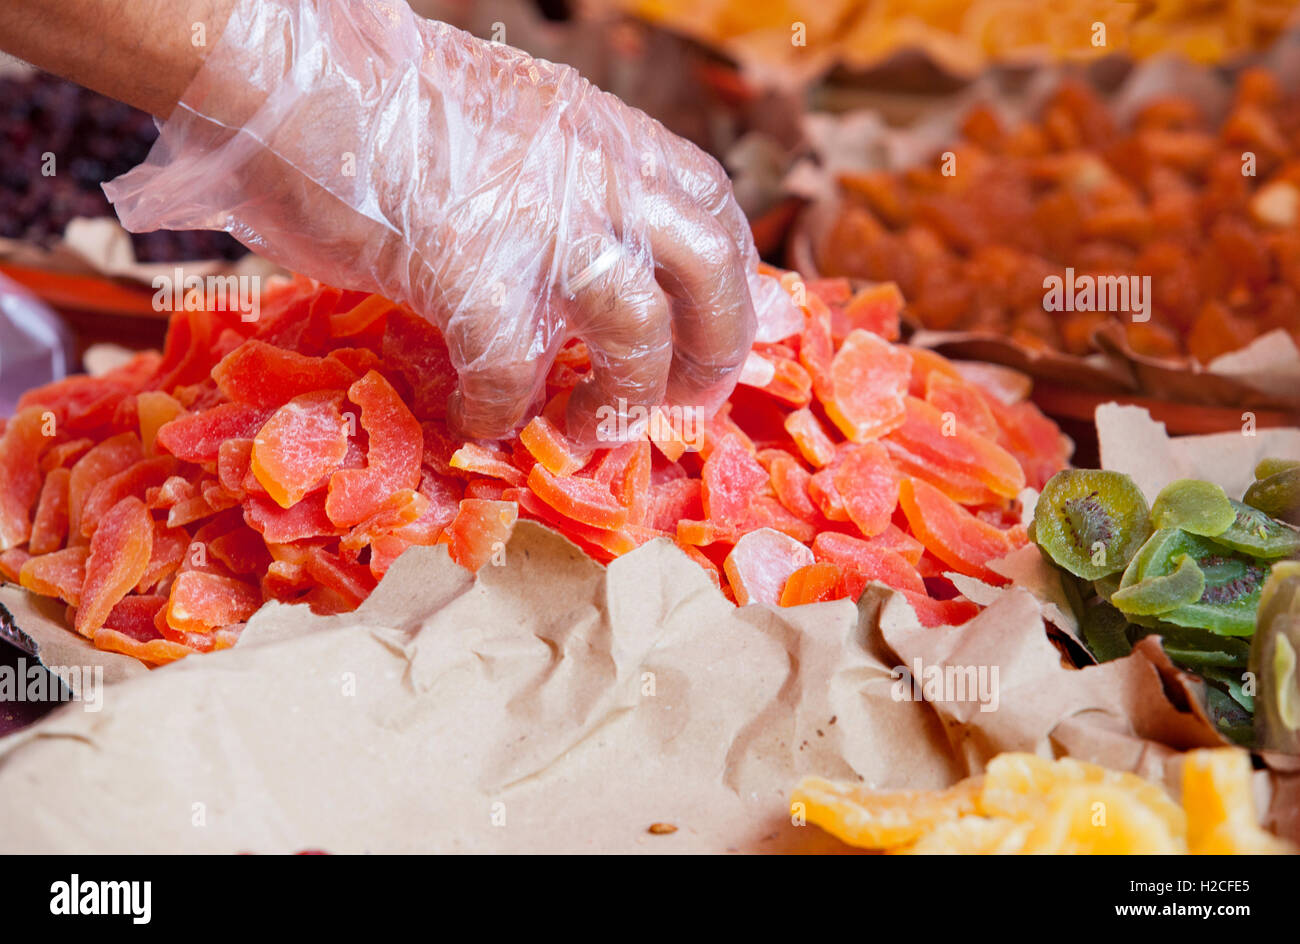 Colorful sweets, candied, dried fruit and jellies at street market stall Stock Photo